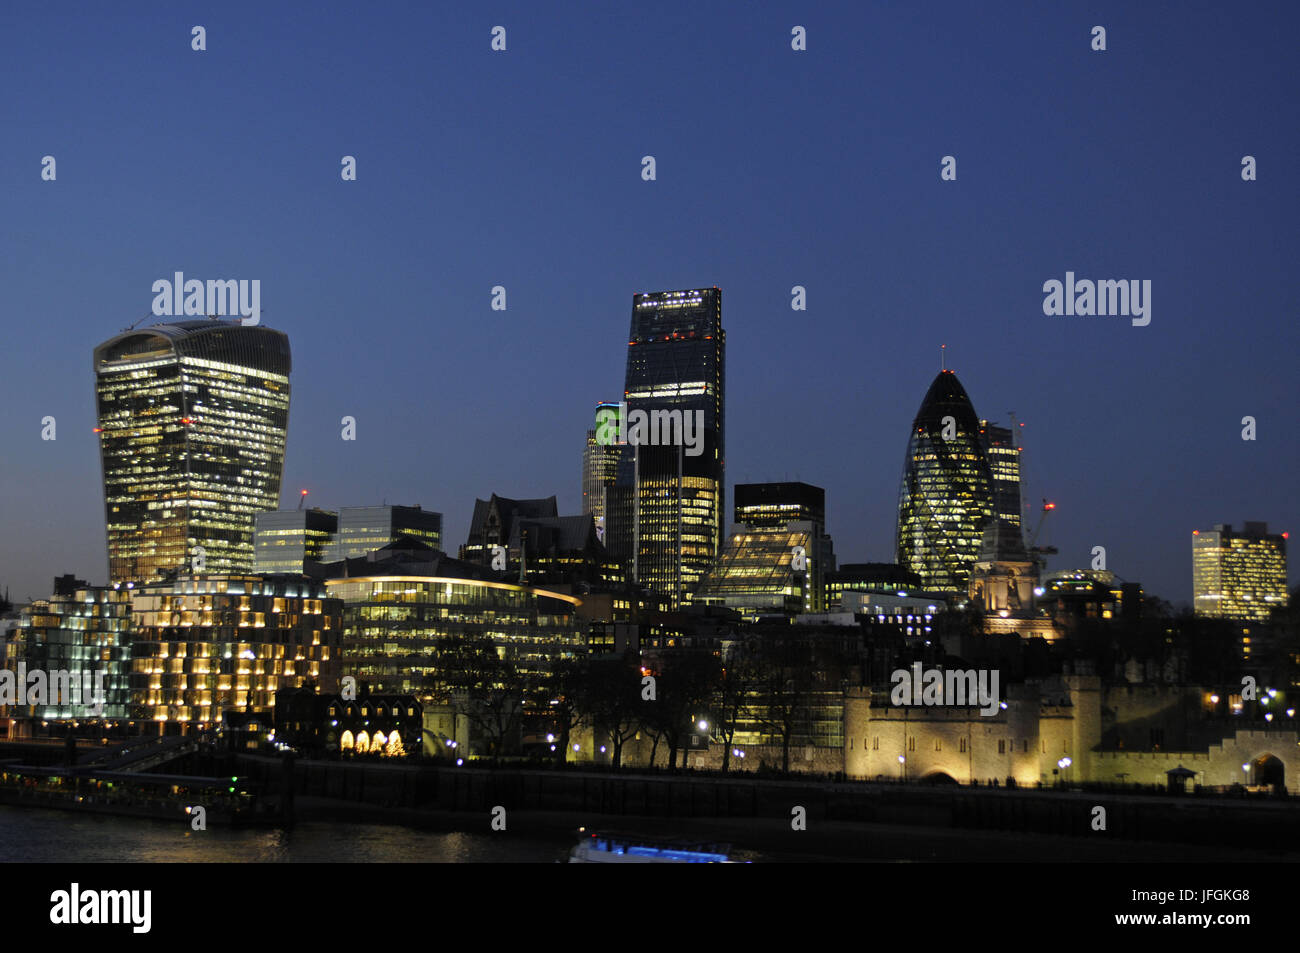 The Modern skyline of the City of London with The Walkie Talkie Building, The Gherkin, The Cheesegrater and Tower of London at night, London, England Stock Photo